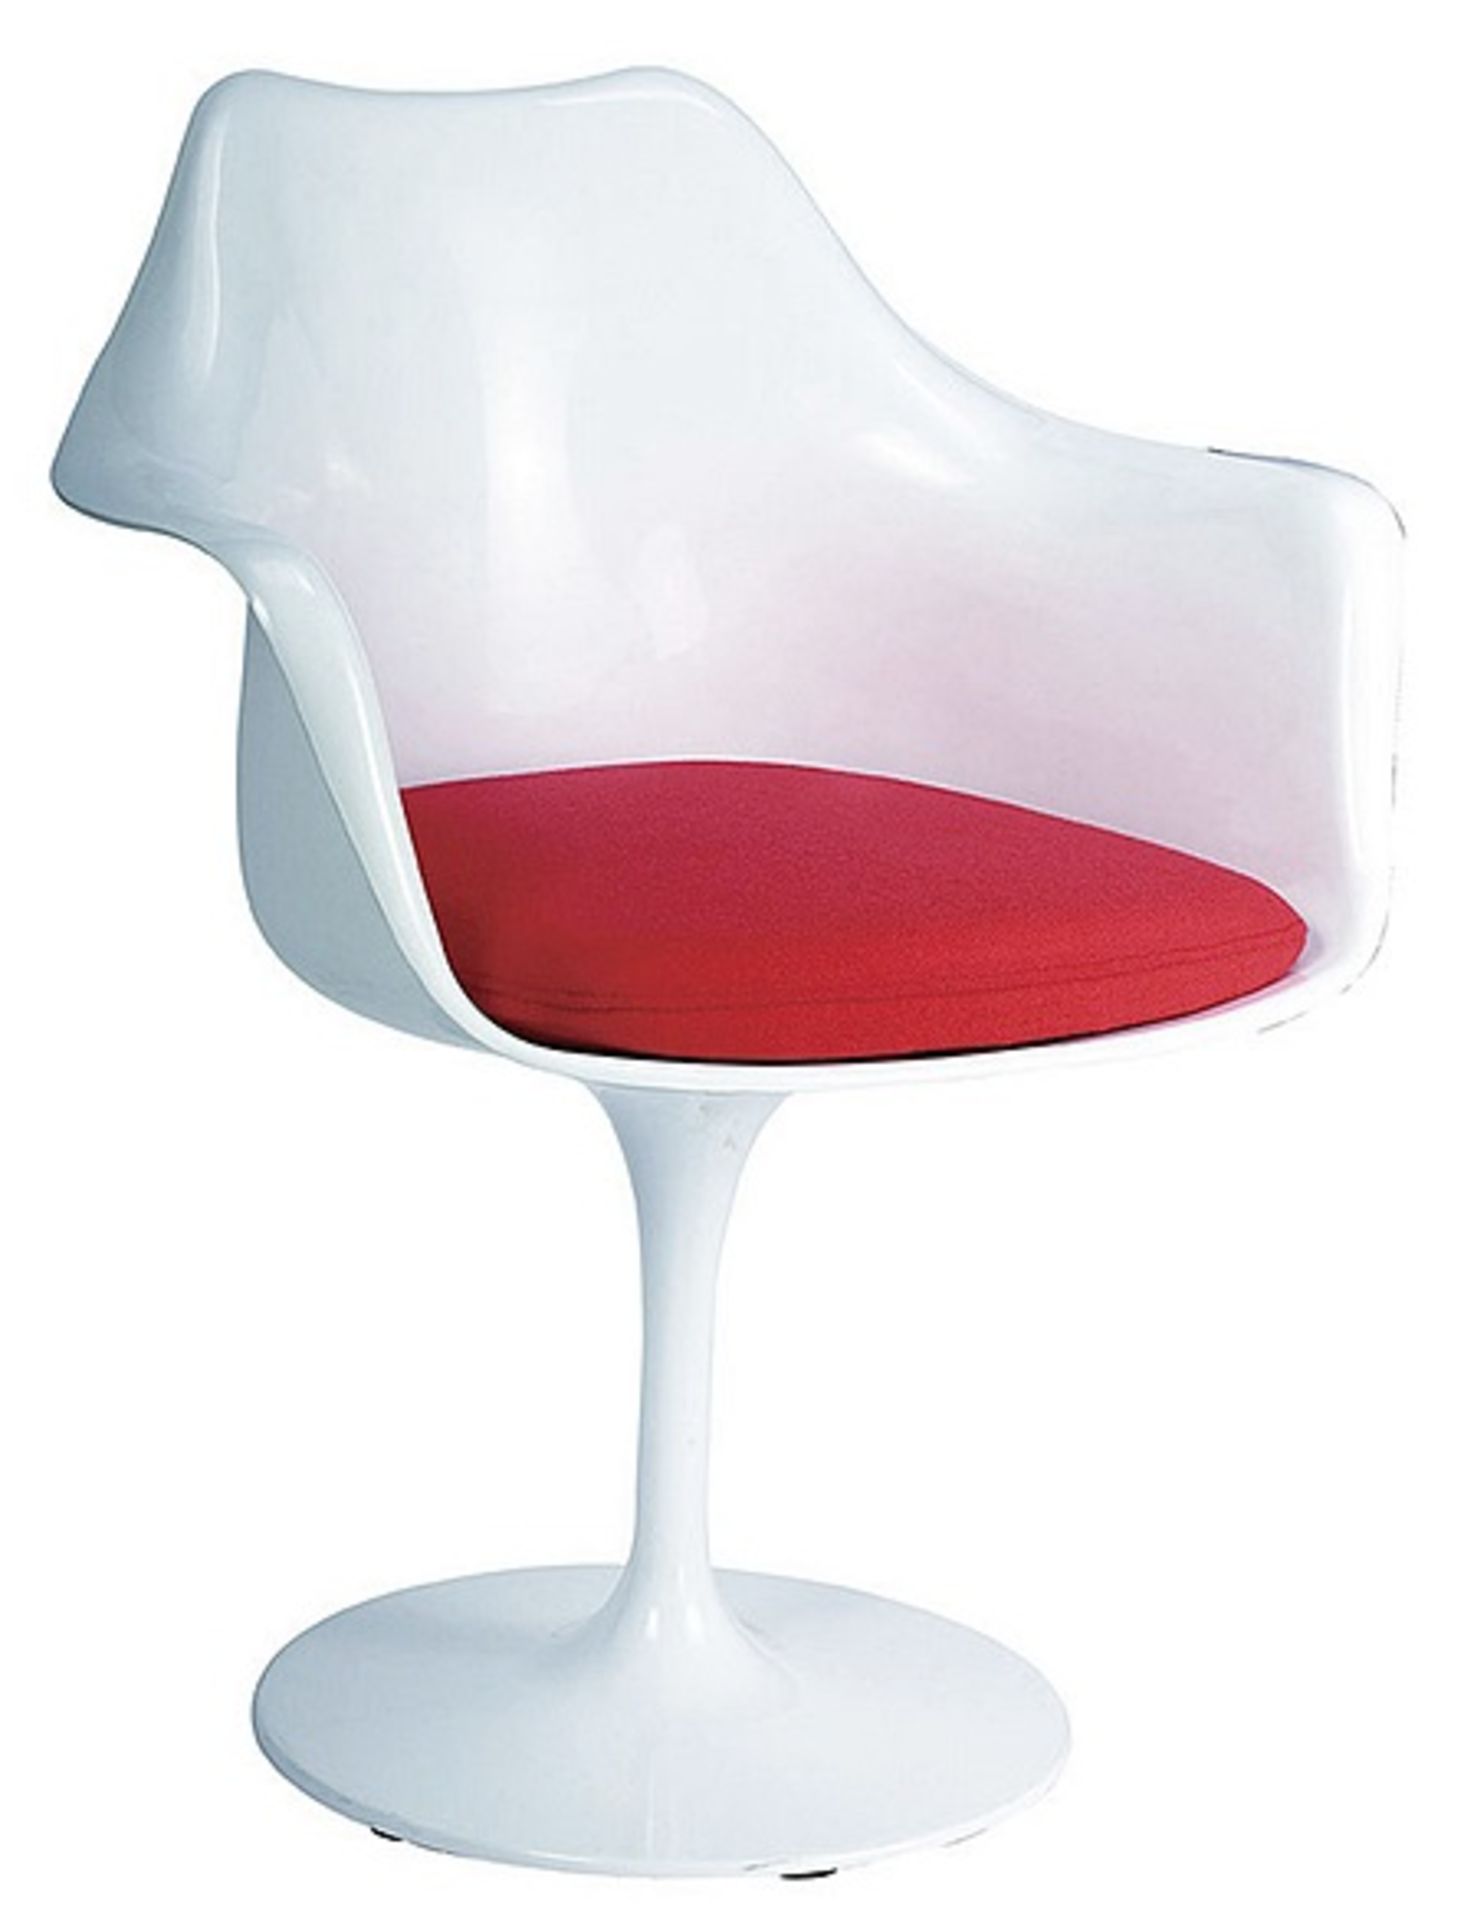 1 x Eero Saarinen Inspired Tulip Armchair In White With RED Fabric Cushion - Brand New Boxed Stock - - Image 2 of 3